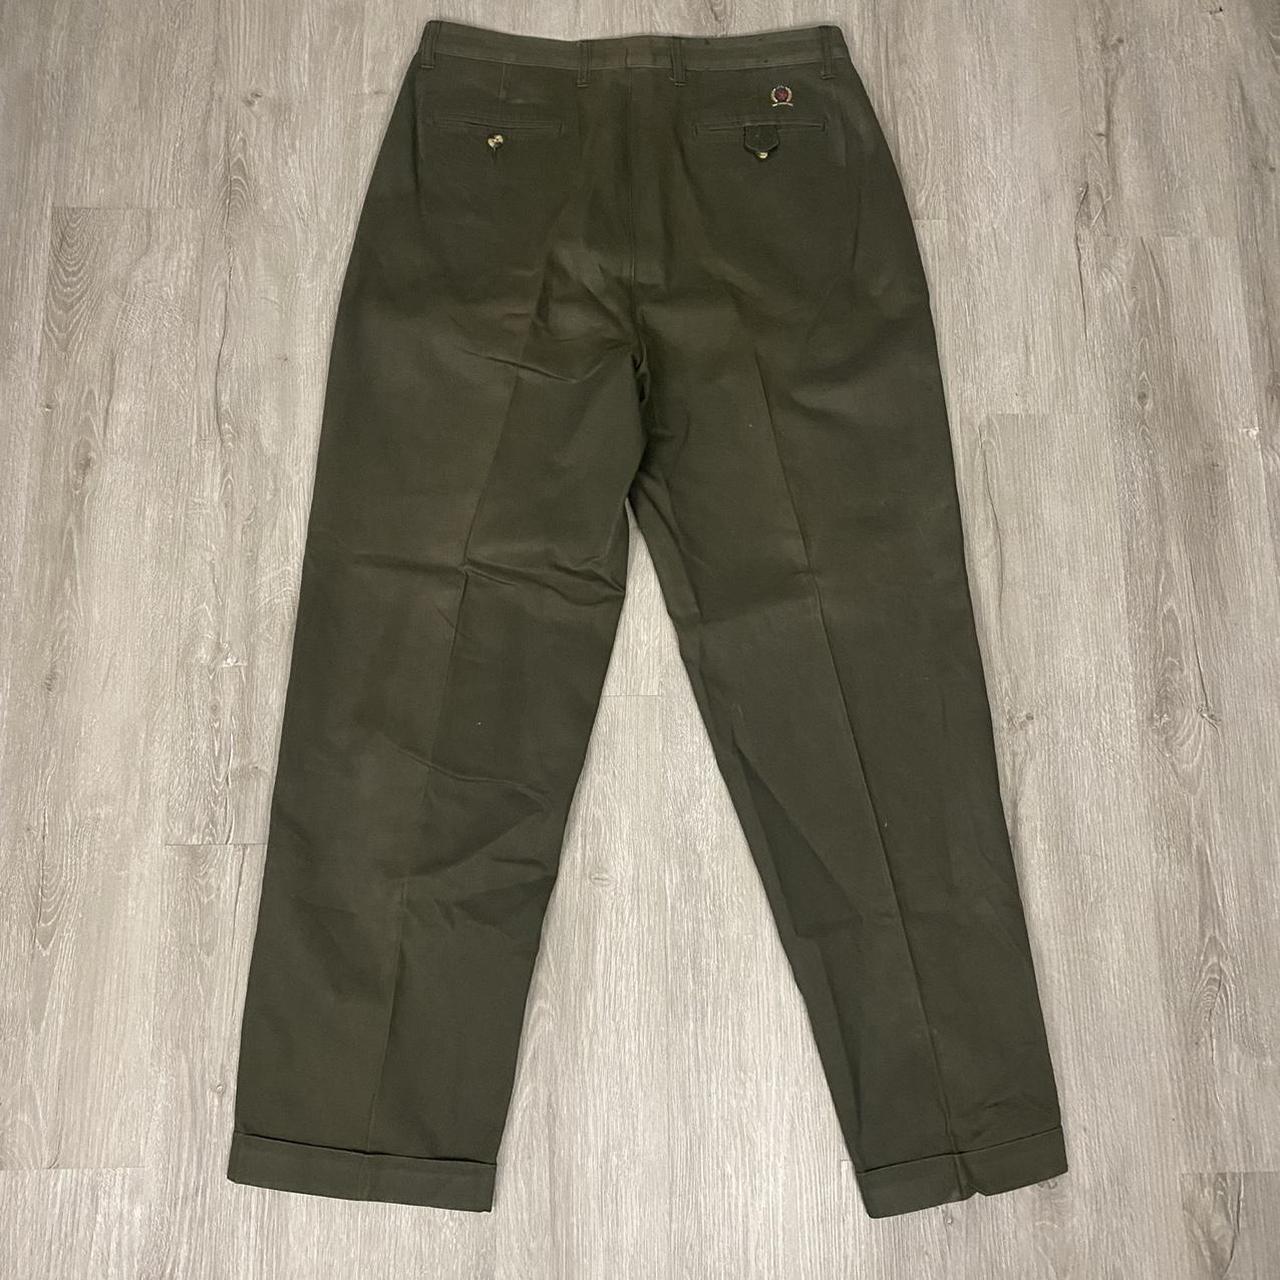 Product Image 1 - Vintage Tommy Hilfiger pants 36x32
In